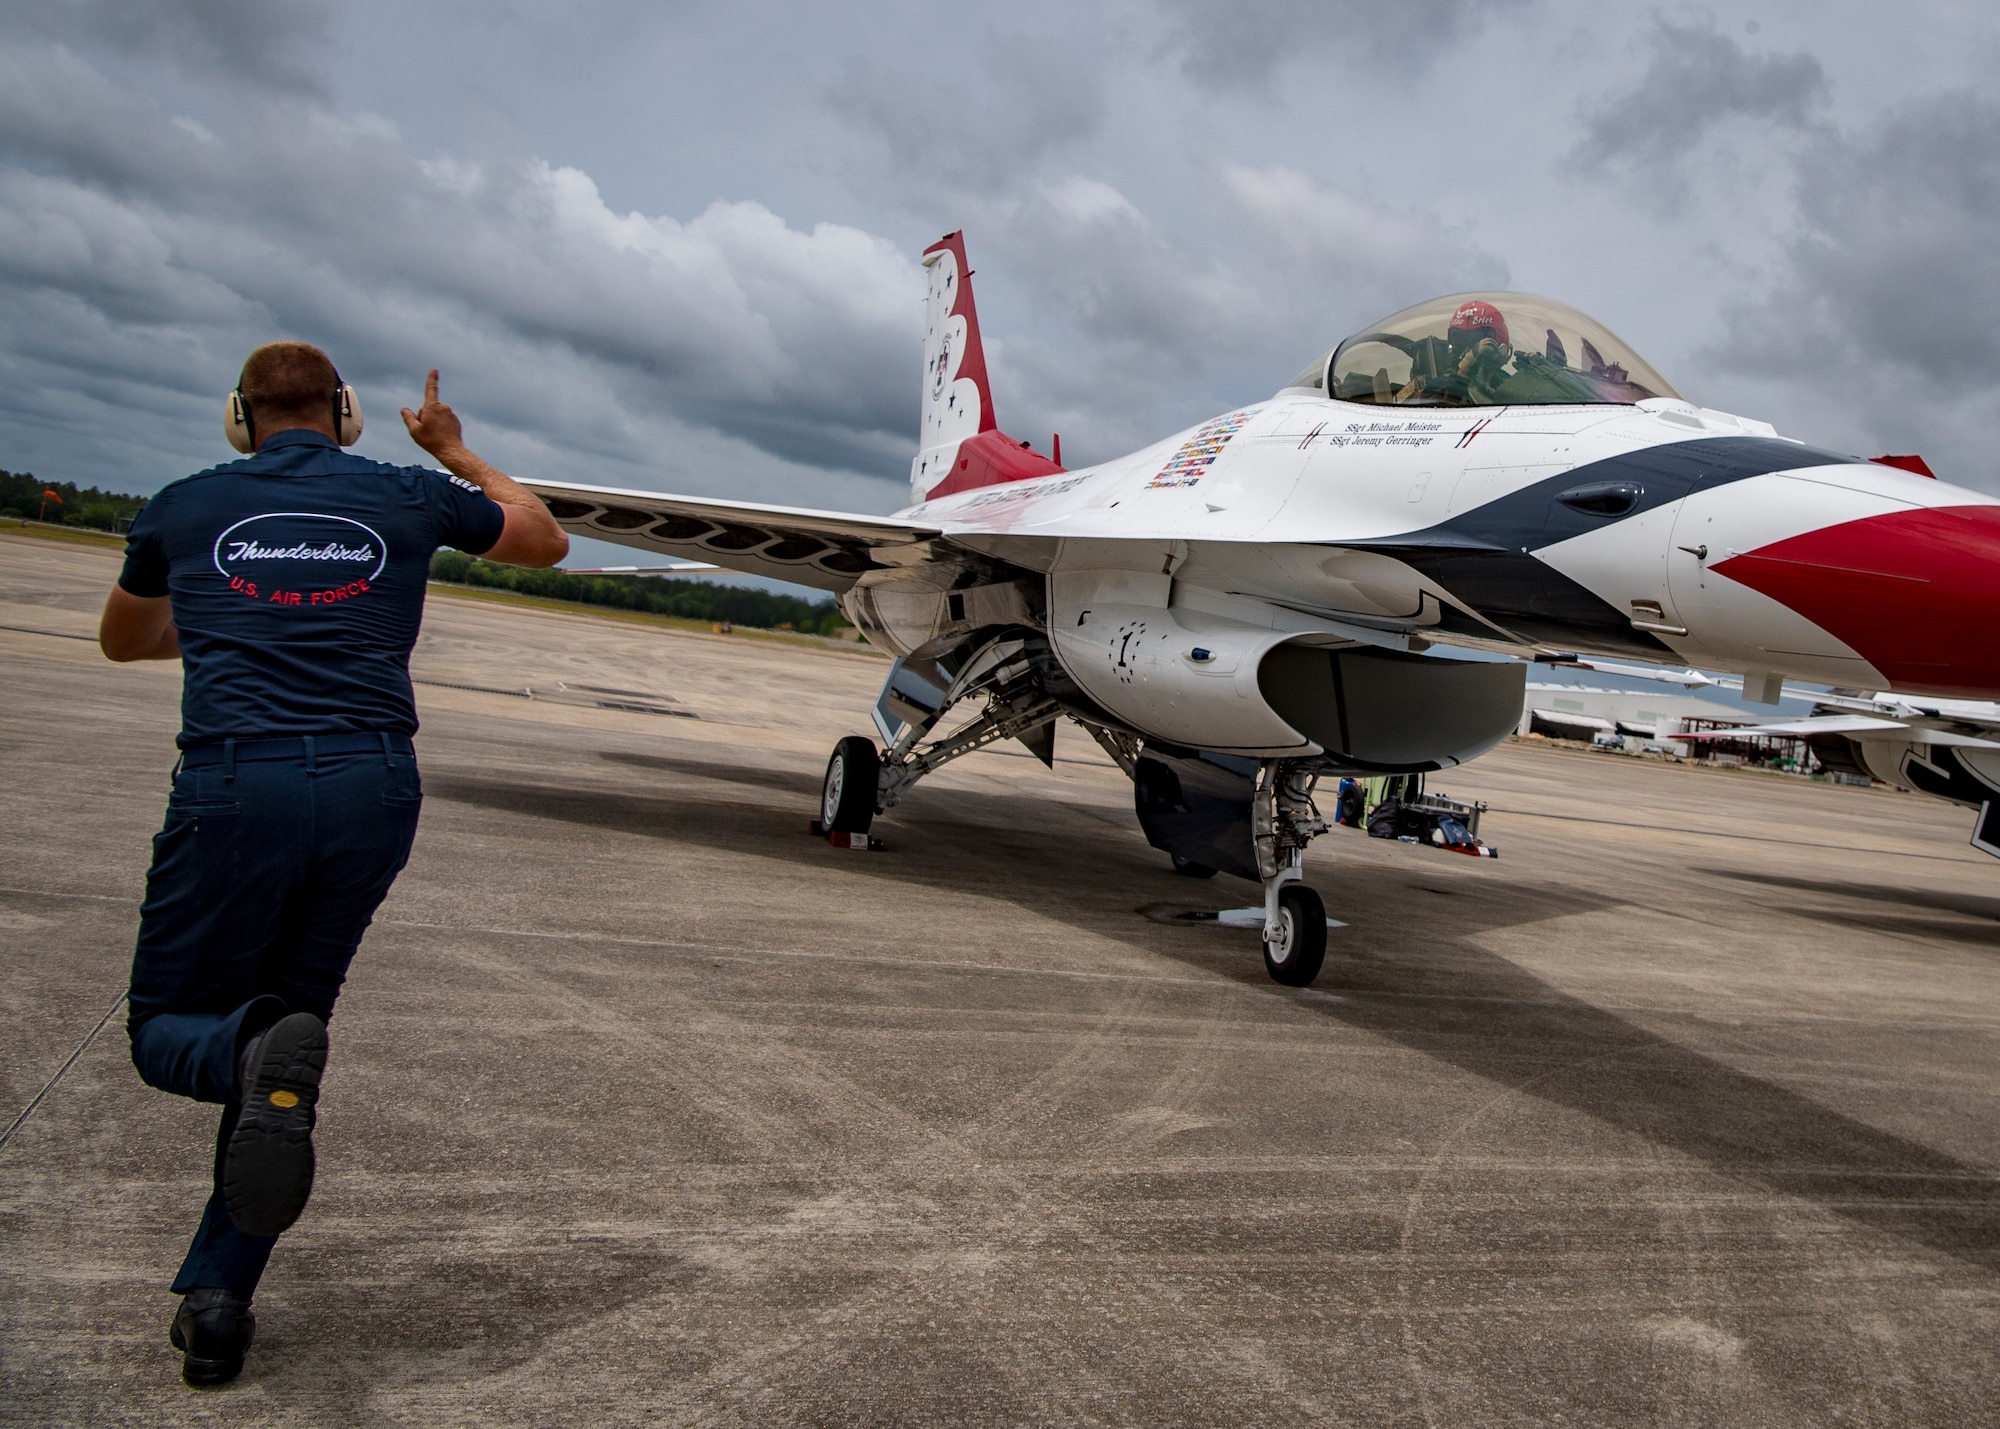 The United States Air Force Air Demonstration Squadron "Thunderbirds" will perform at the Grissom Air & Space Expo Sept. 7-8, 2019 at Grissom Air Reserve Base, Ind. Gates open at 8:30 a.m. and admission is free! (U.S. Air Force Photo/SSgt Cory W. Bush)